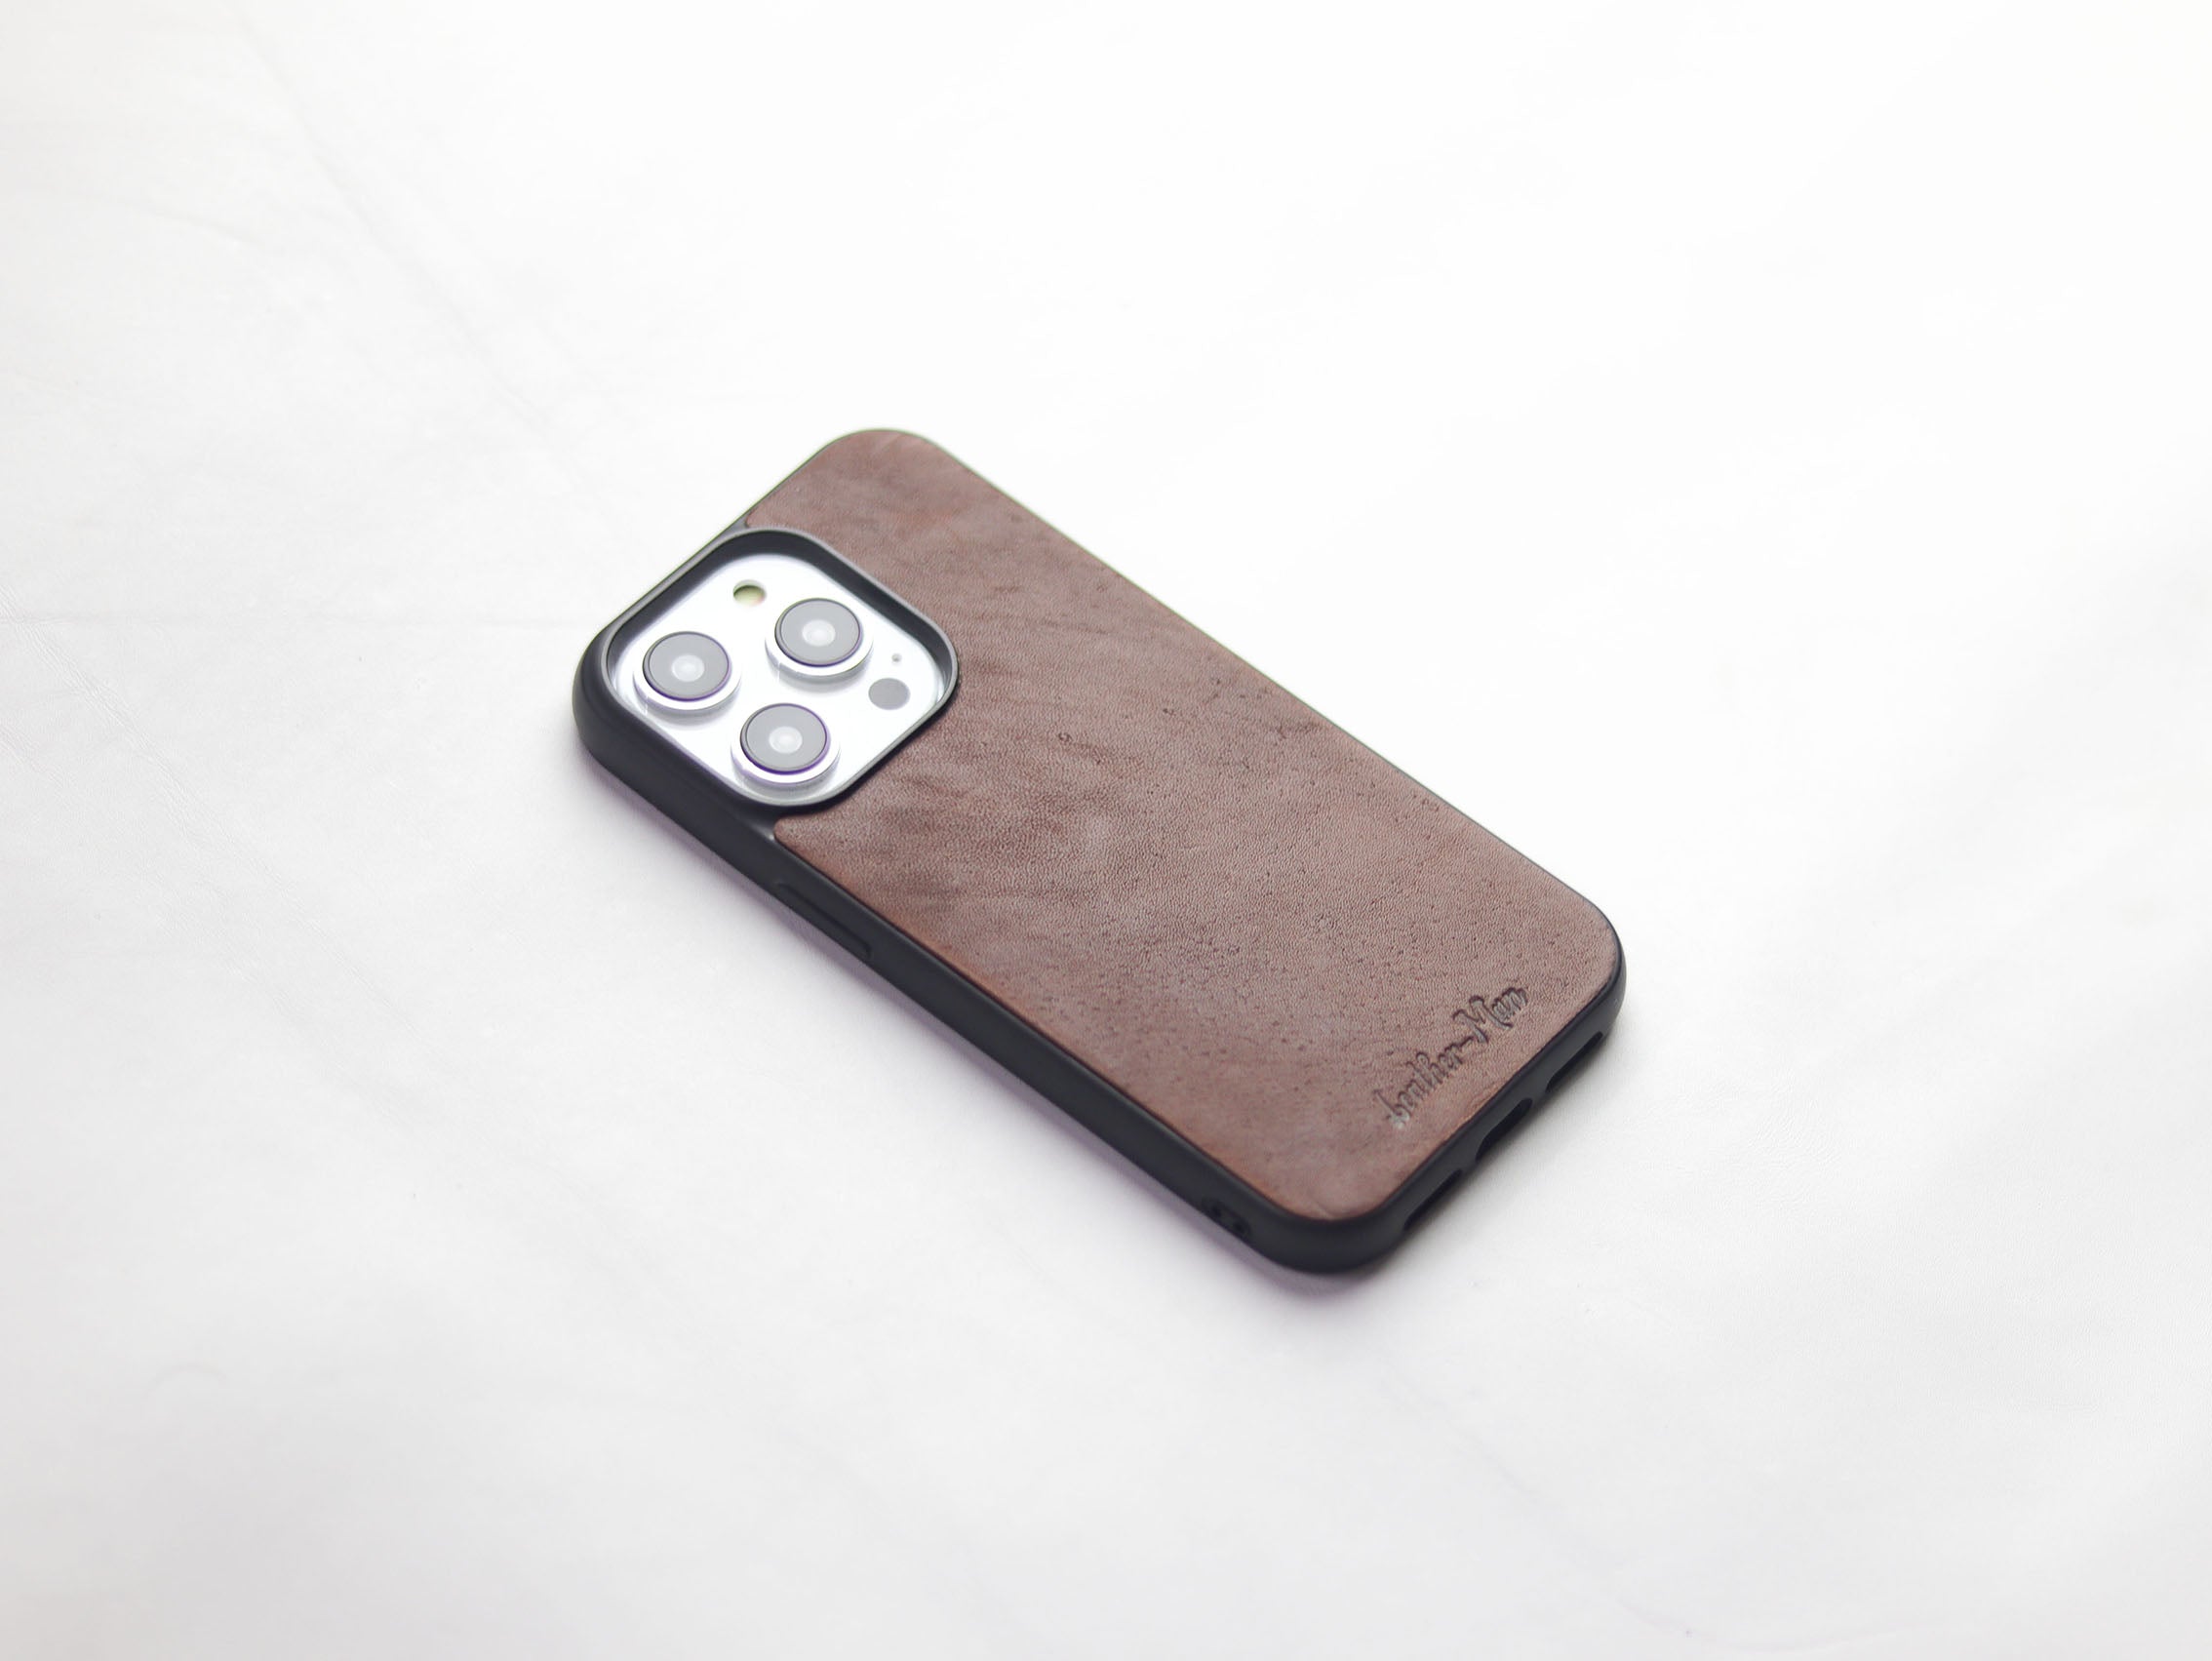 CHESTNUT BROWN LEATHER CLASSIC PHONE CASE